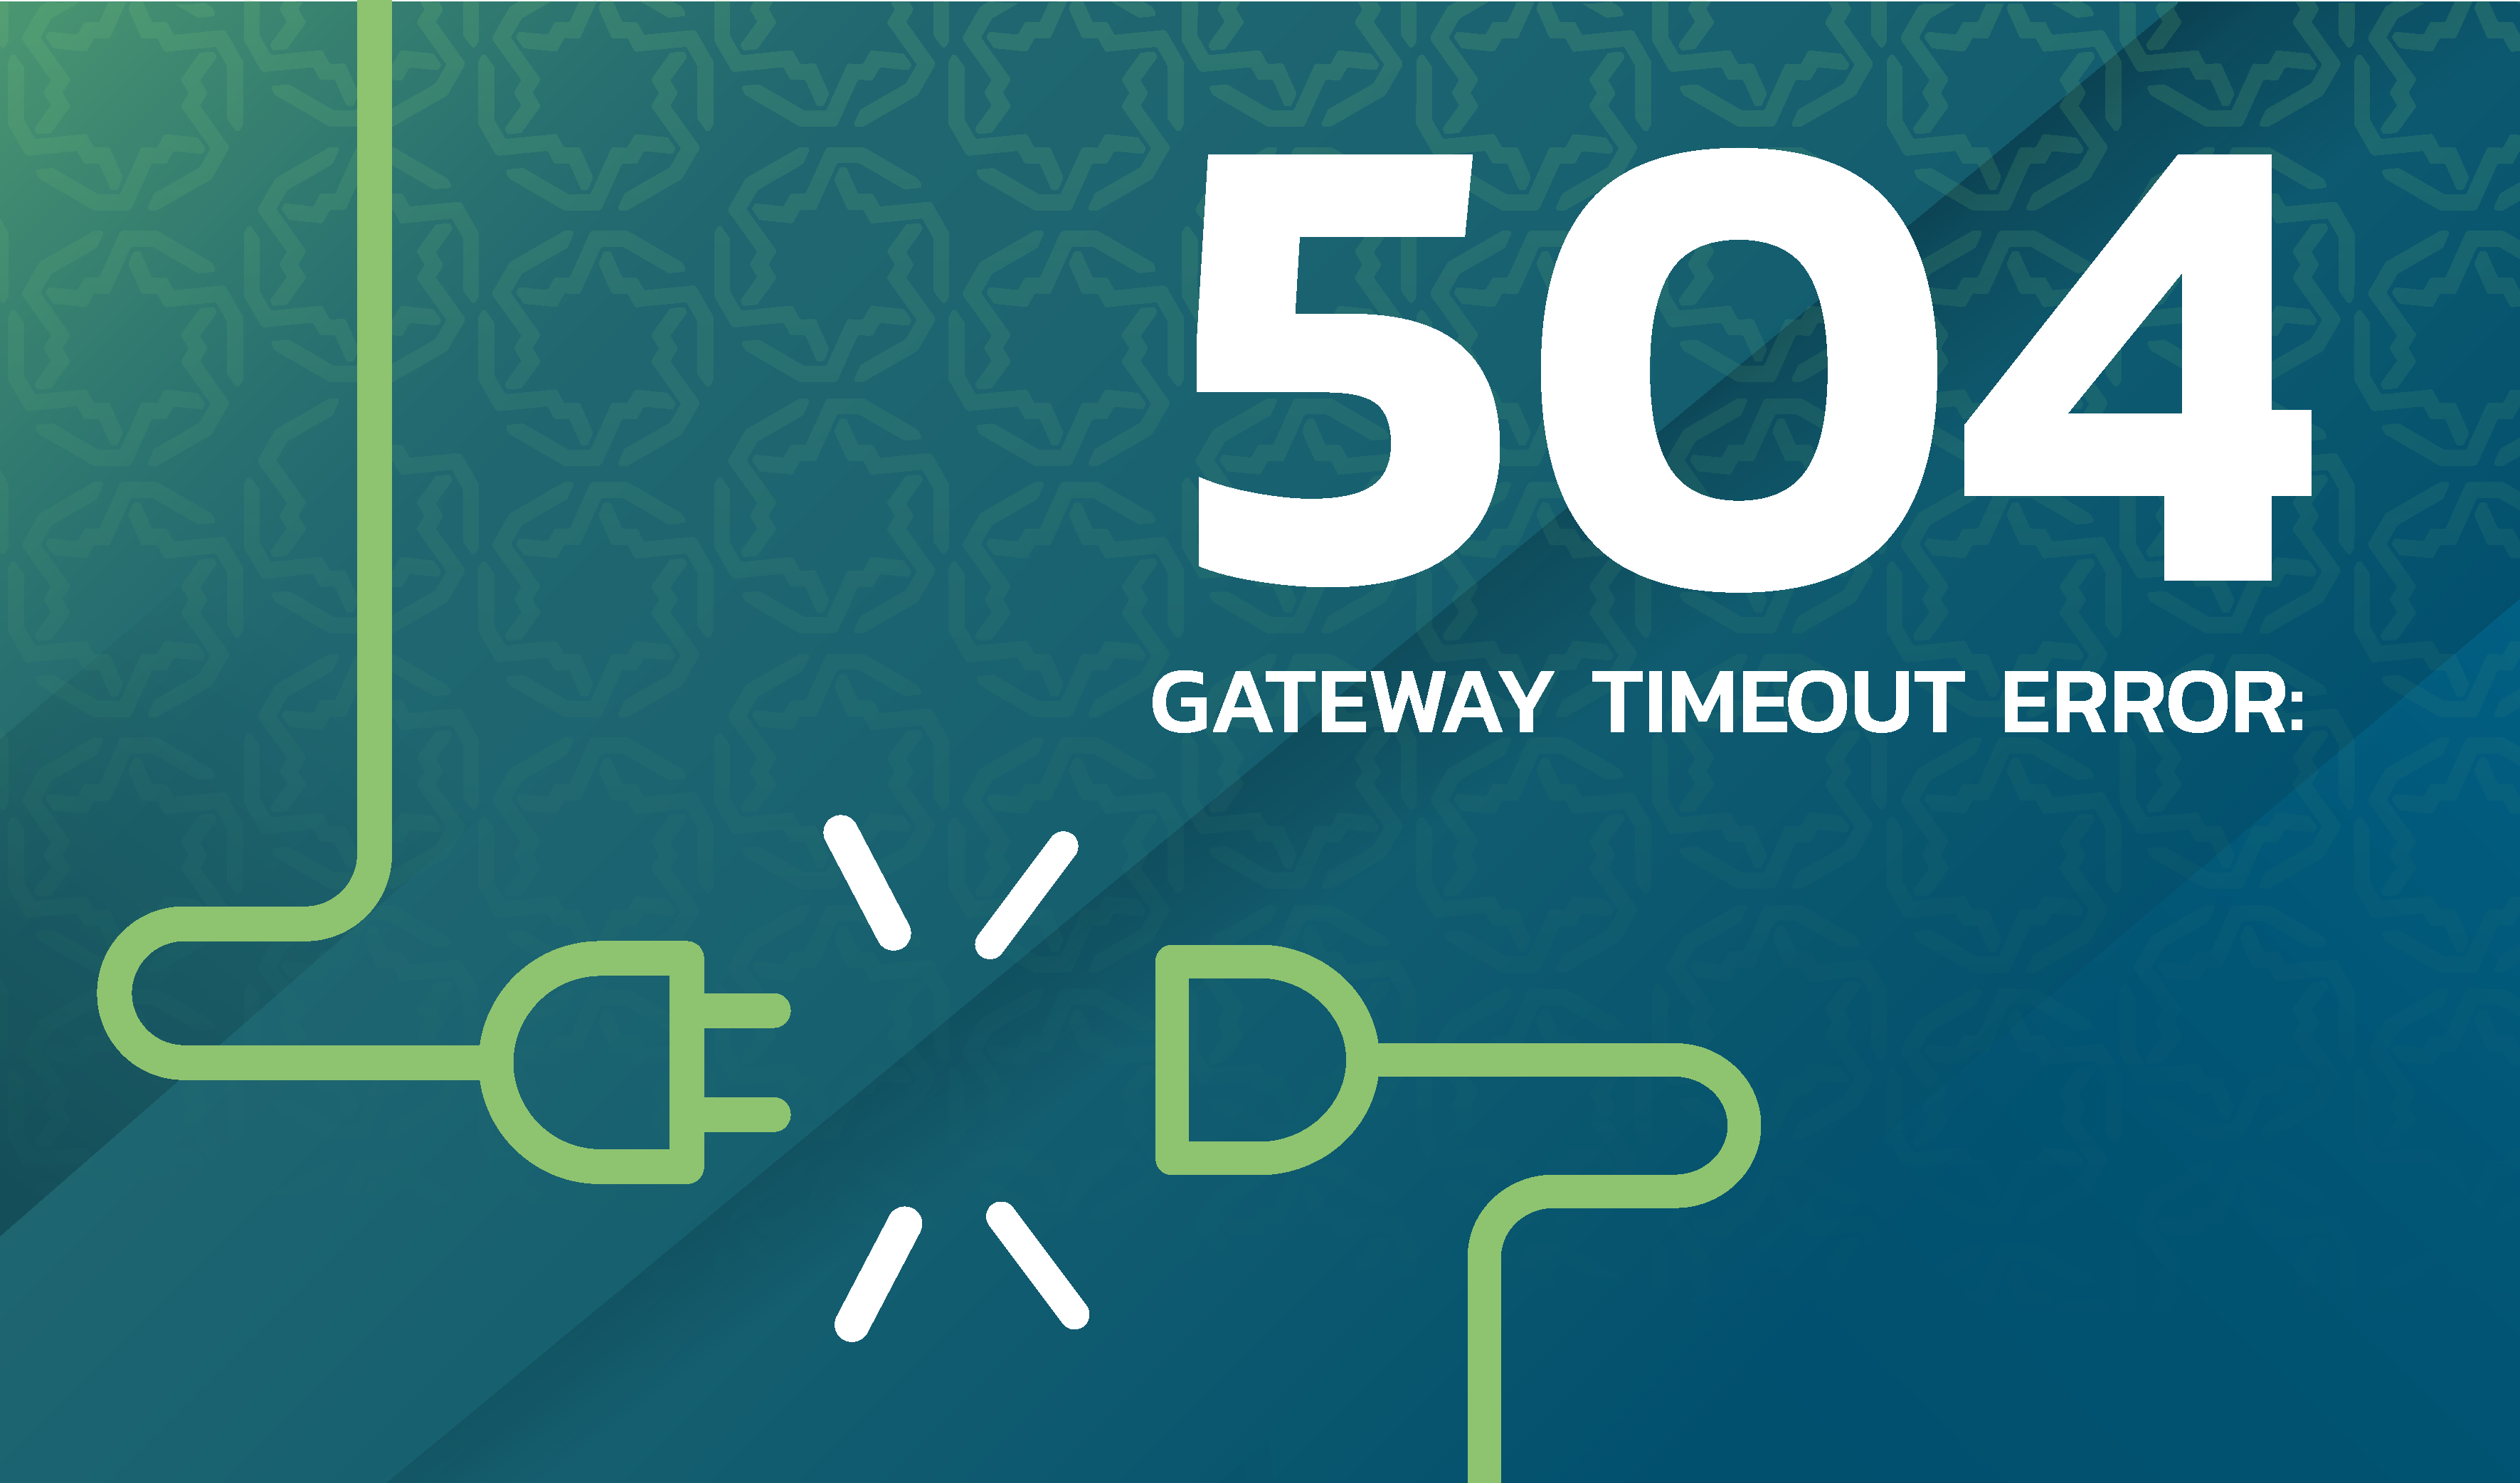 504 gateway timeout error - image shows a connection of two cables which have come apart and are no longer connected